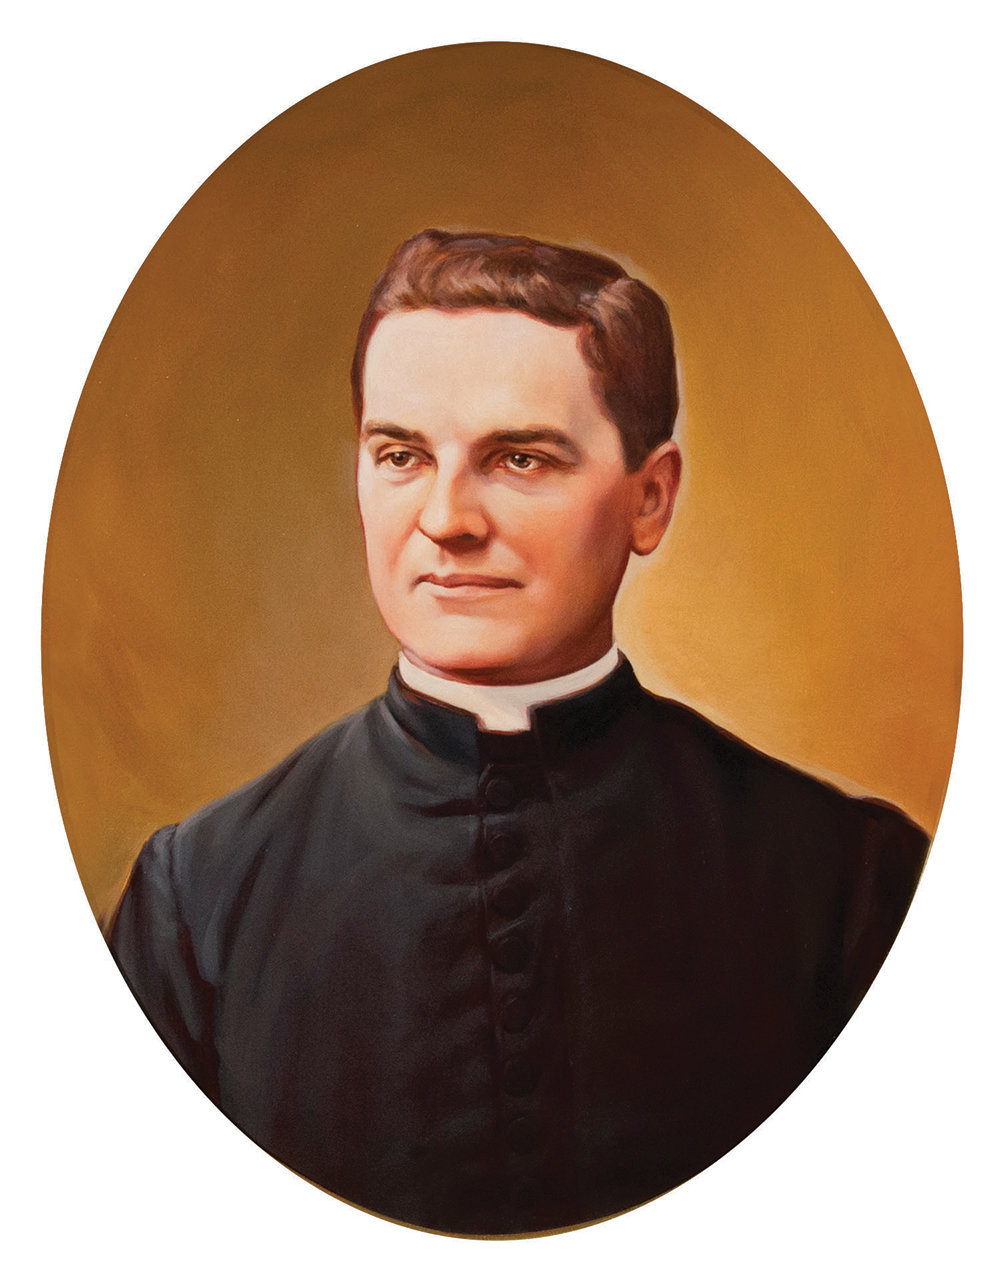 SAINTLY EXPRESSION—This official portrait of Father Michael McGivney, founder of the Knights of Columbus, will be unveiled at his Mass of Beatification at St. Joseph’s Cathedral in Hartford, Conn, Saturday, Oct. 31. The portrait is by Chas Fagan.